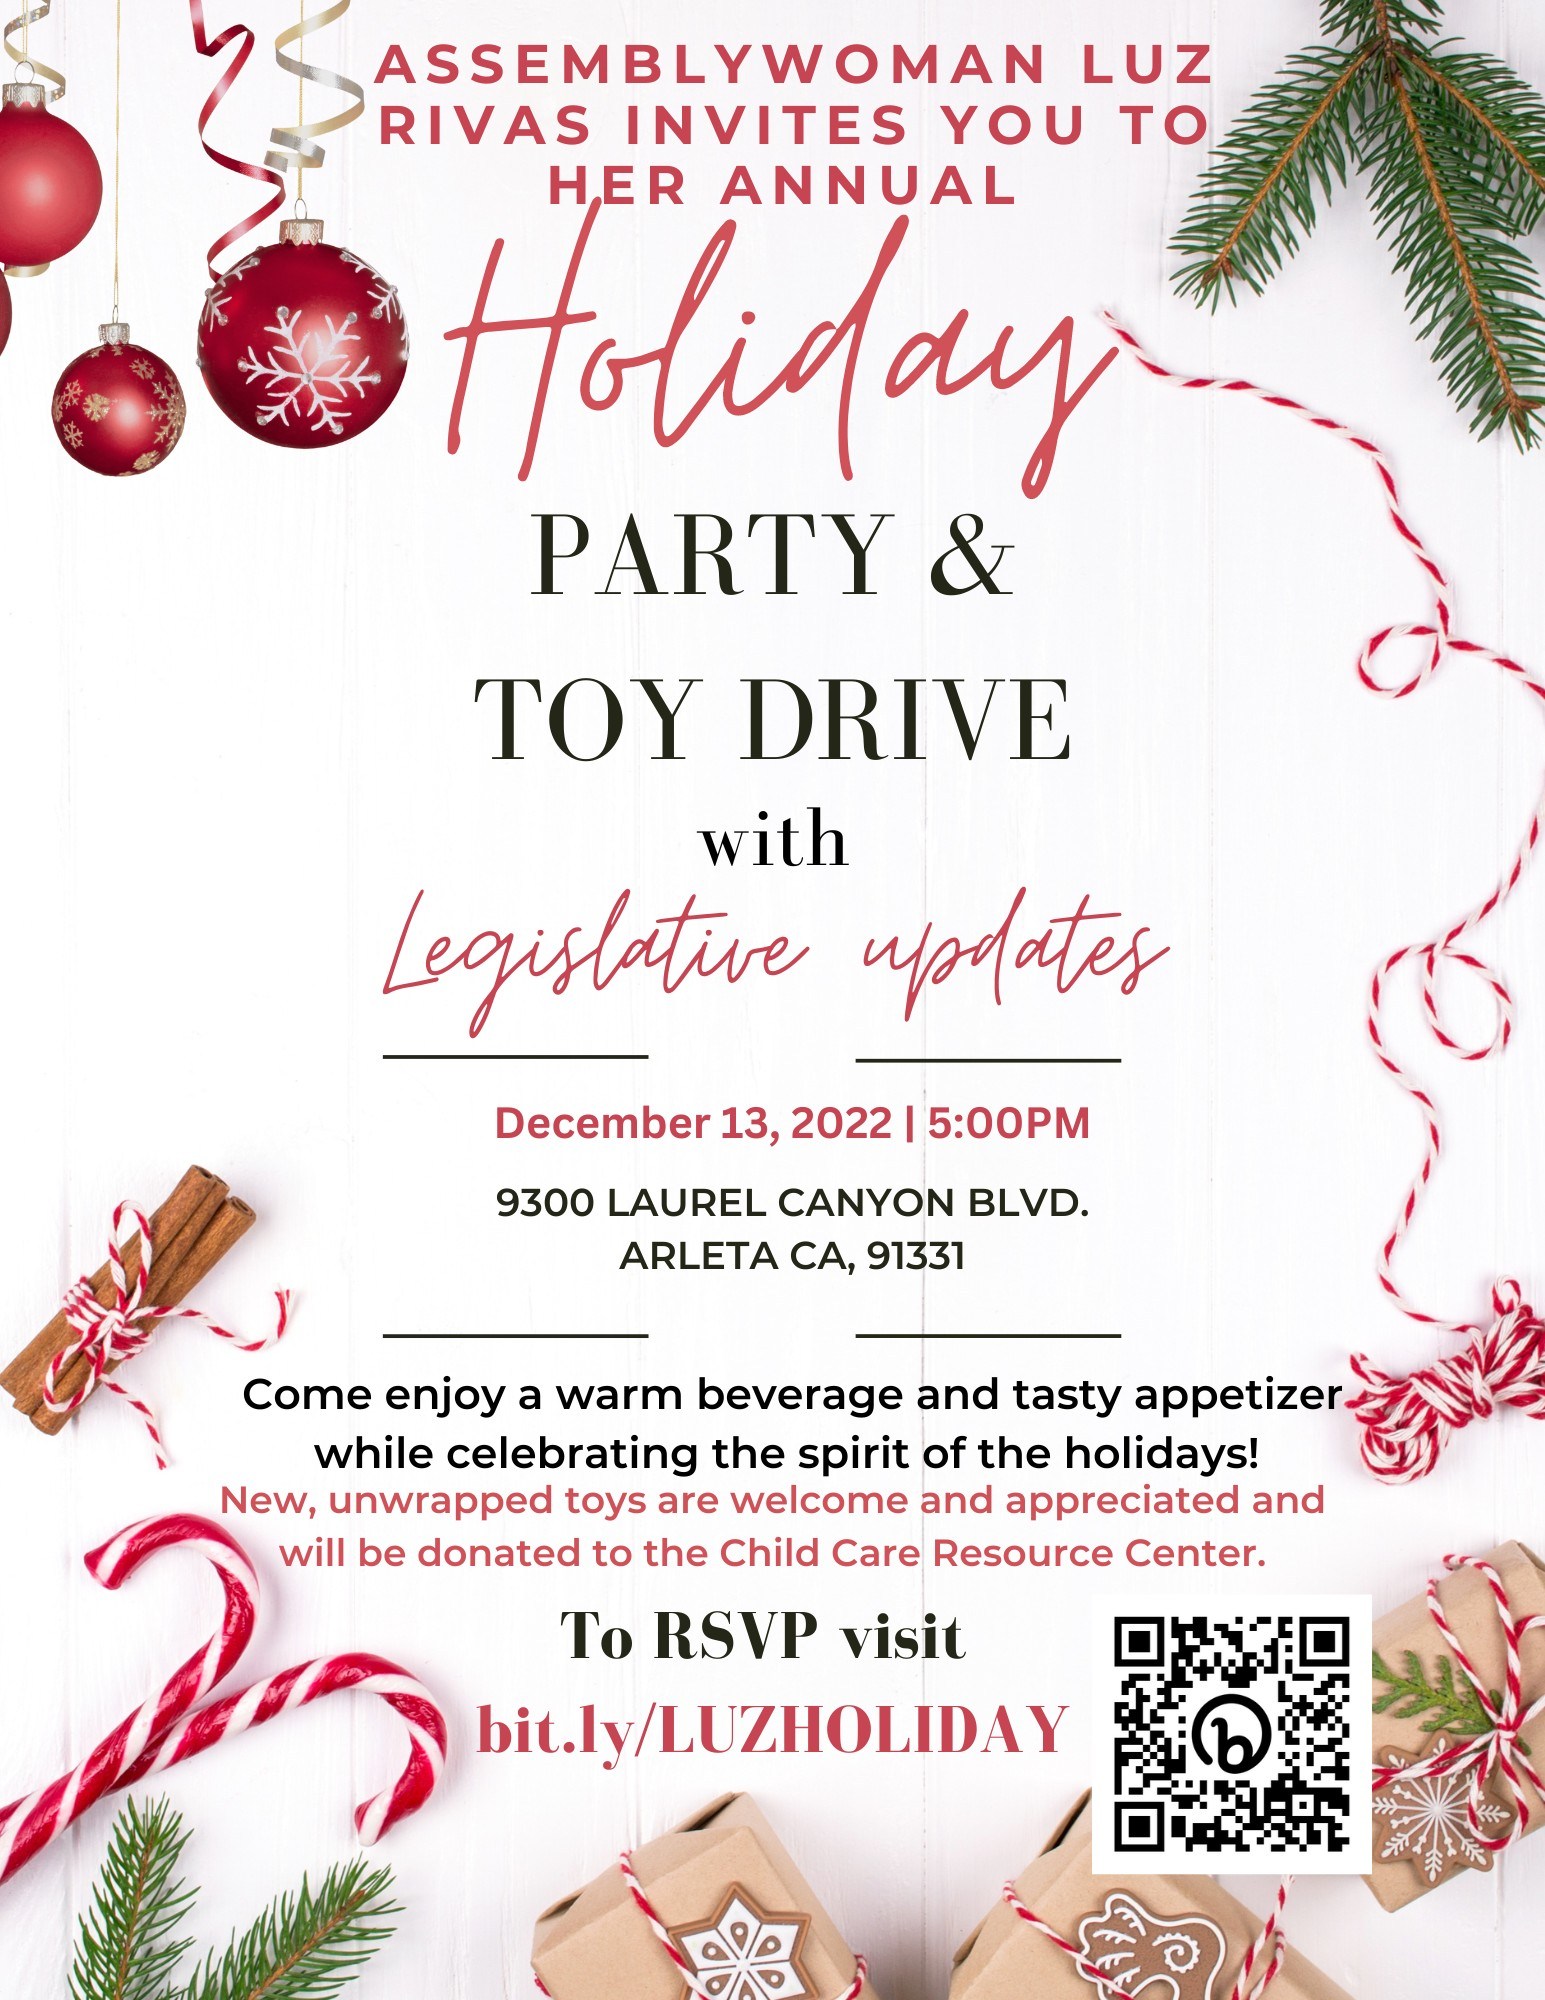 Our Annual Holiday Party and Toy Drive